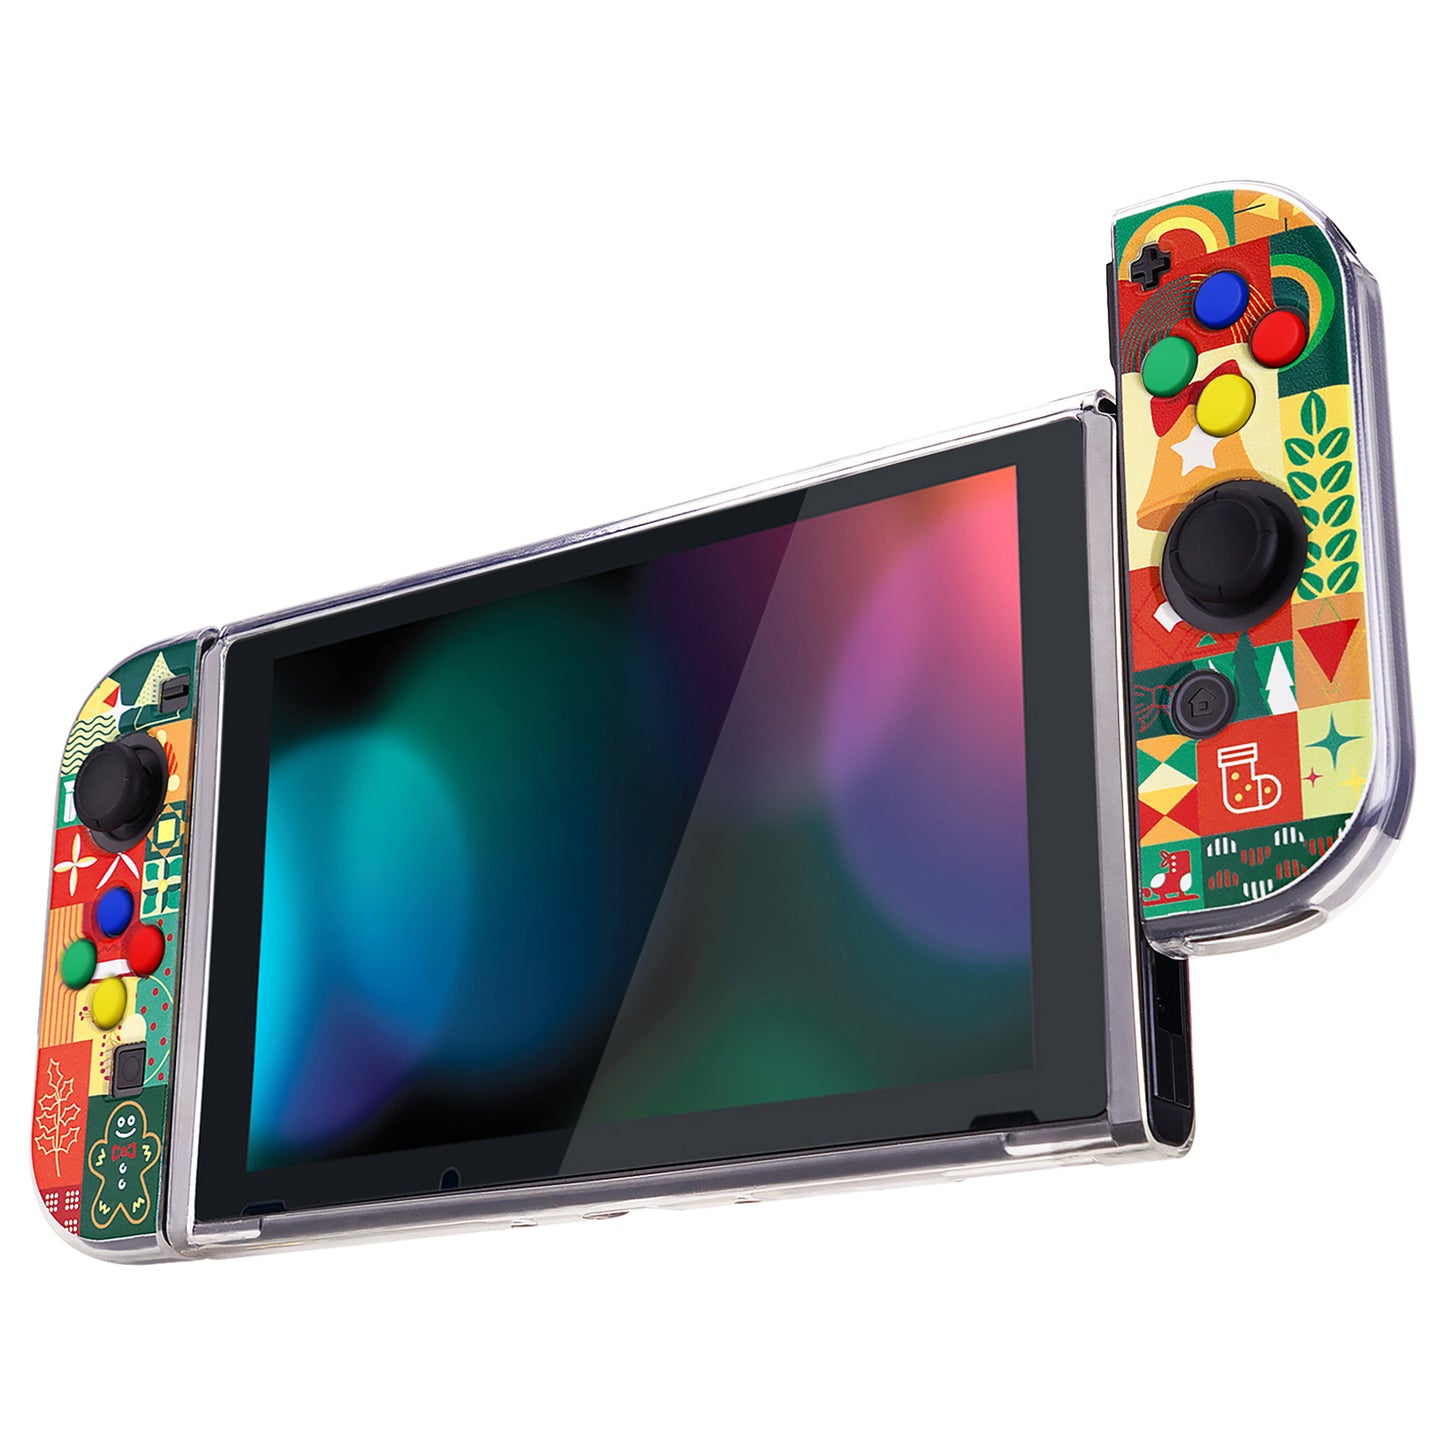 PlayVital Christmas Wrap Protective Case for NS, Soft TPU Slim Case Cover for NS Console with Colorful ABXY Direction Button Caps - NTU6042G2